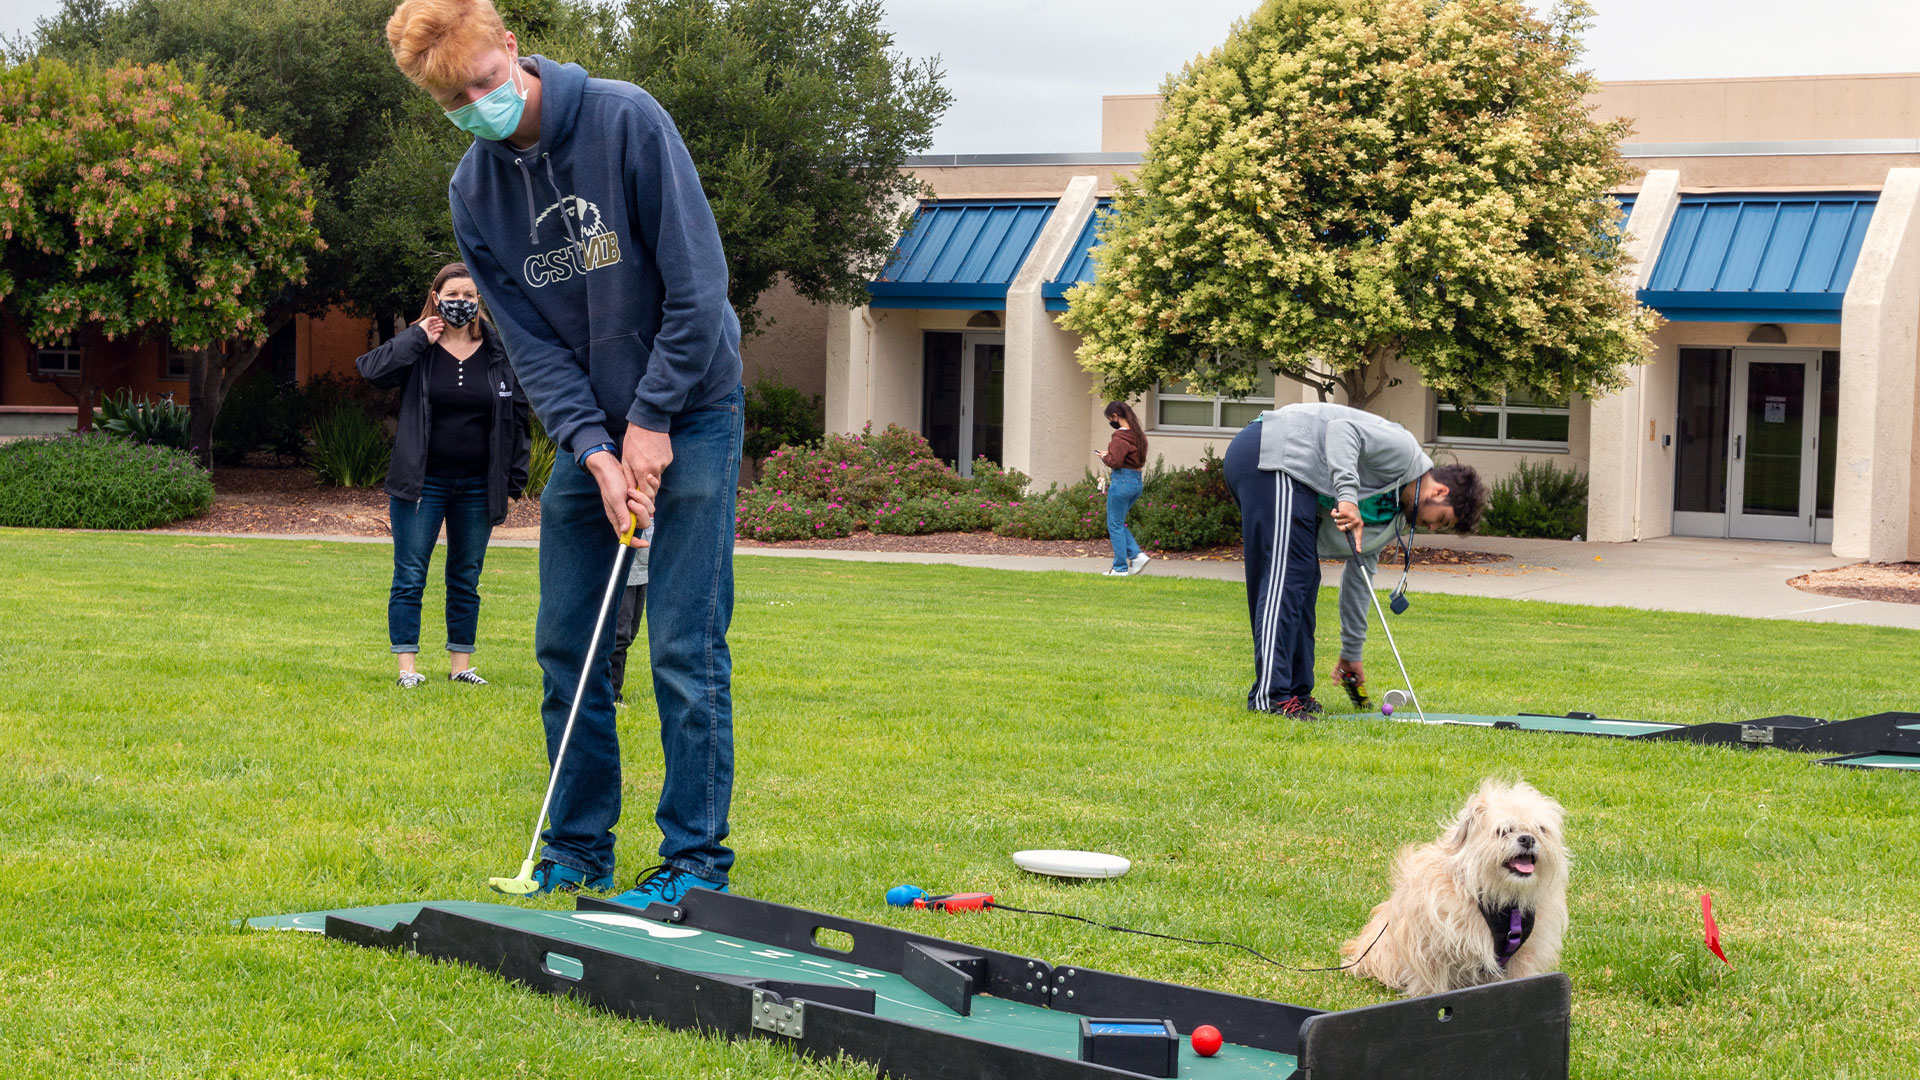 Photo: Masked students playing mini golf and a dog